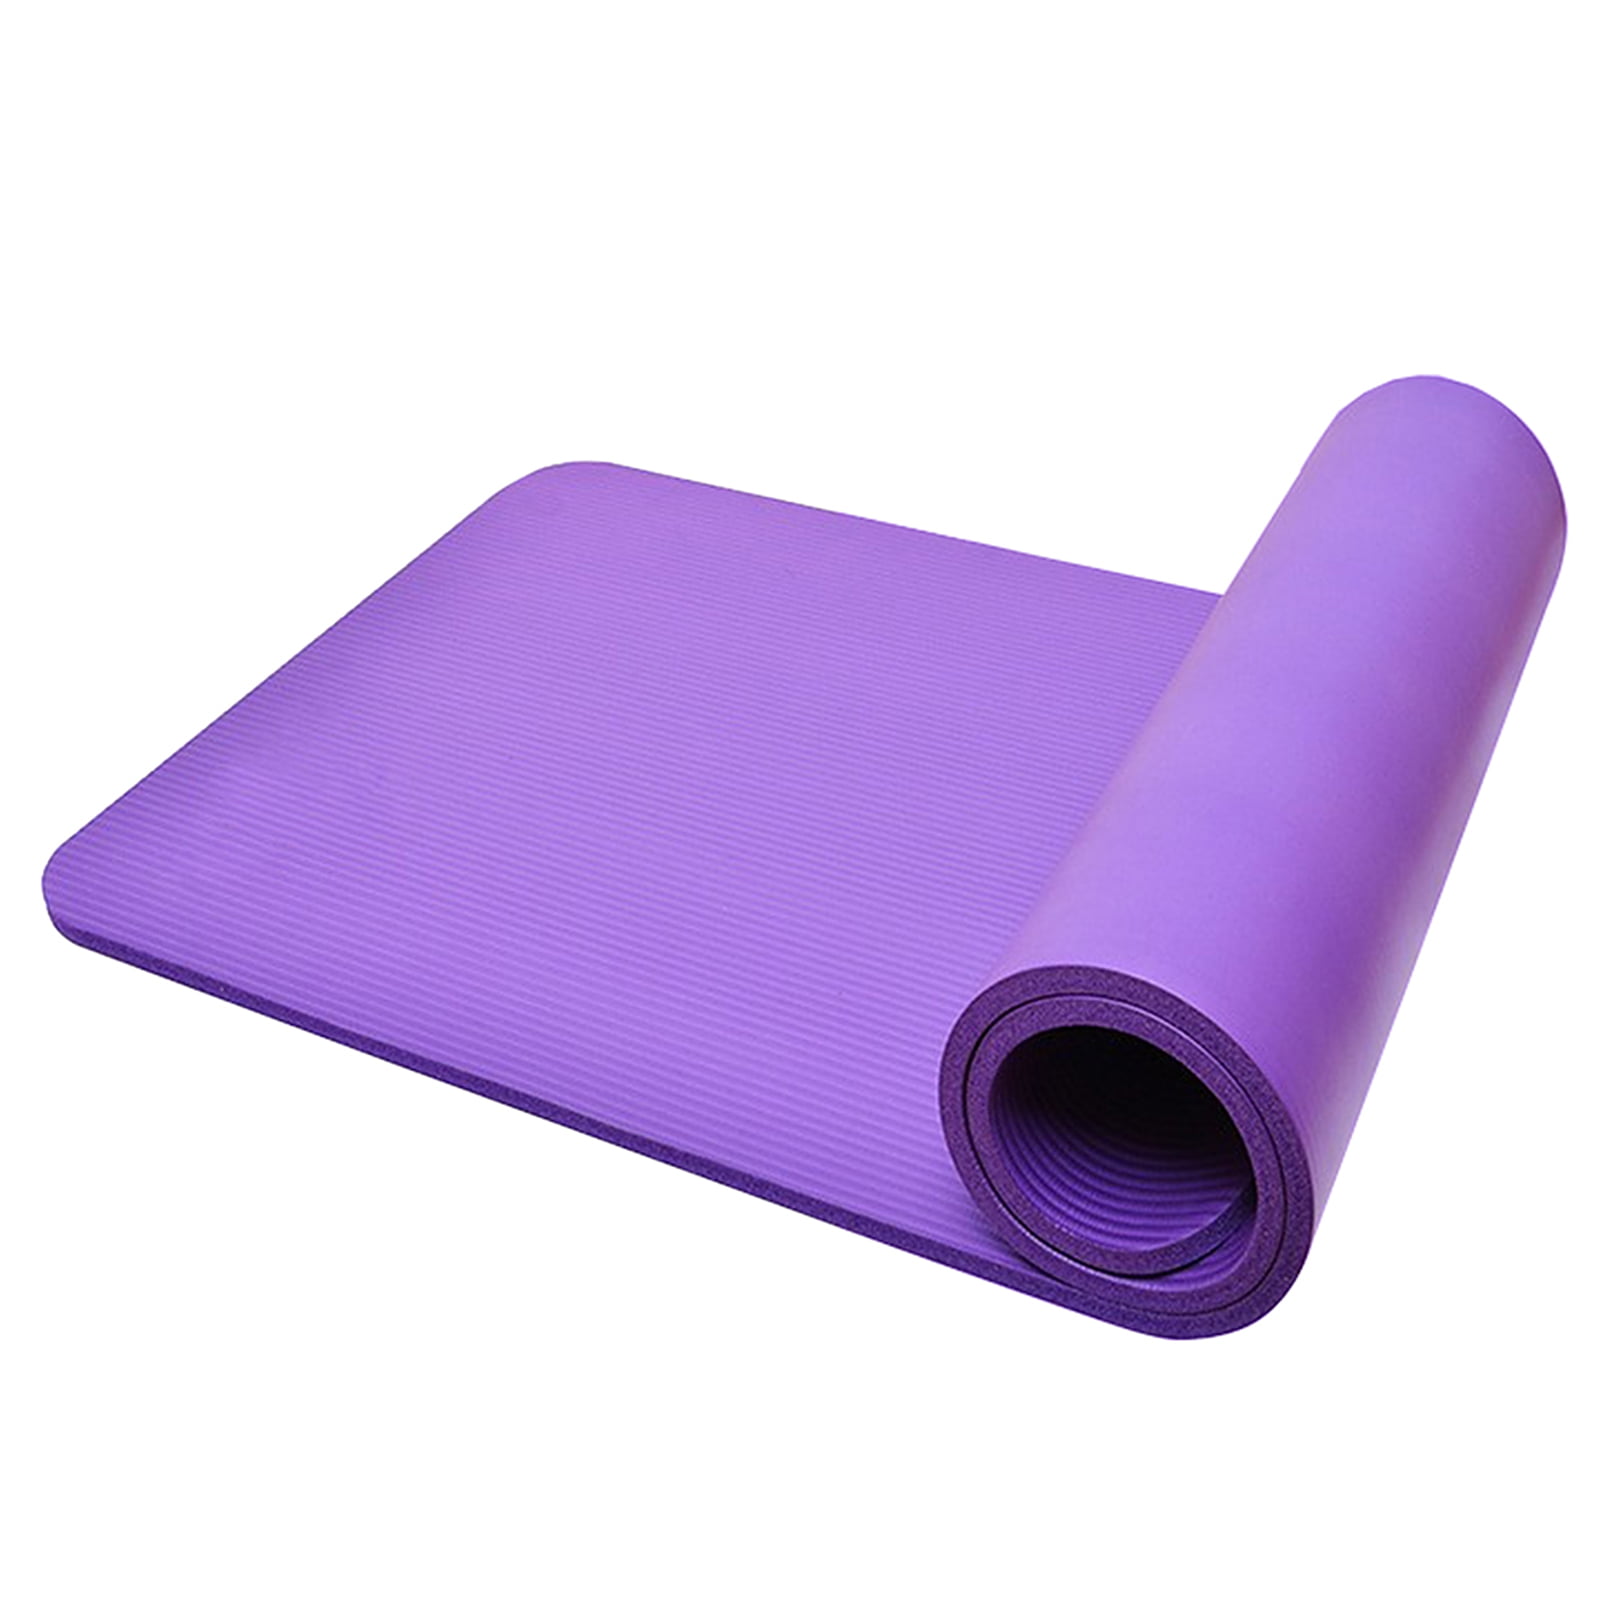 Yoga Mat Gym Fitness Exercise Non Slip Pilates Thick Foam Mats With Strap Carry 